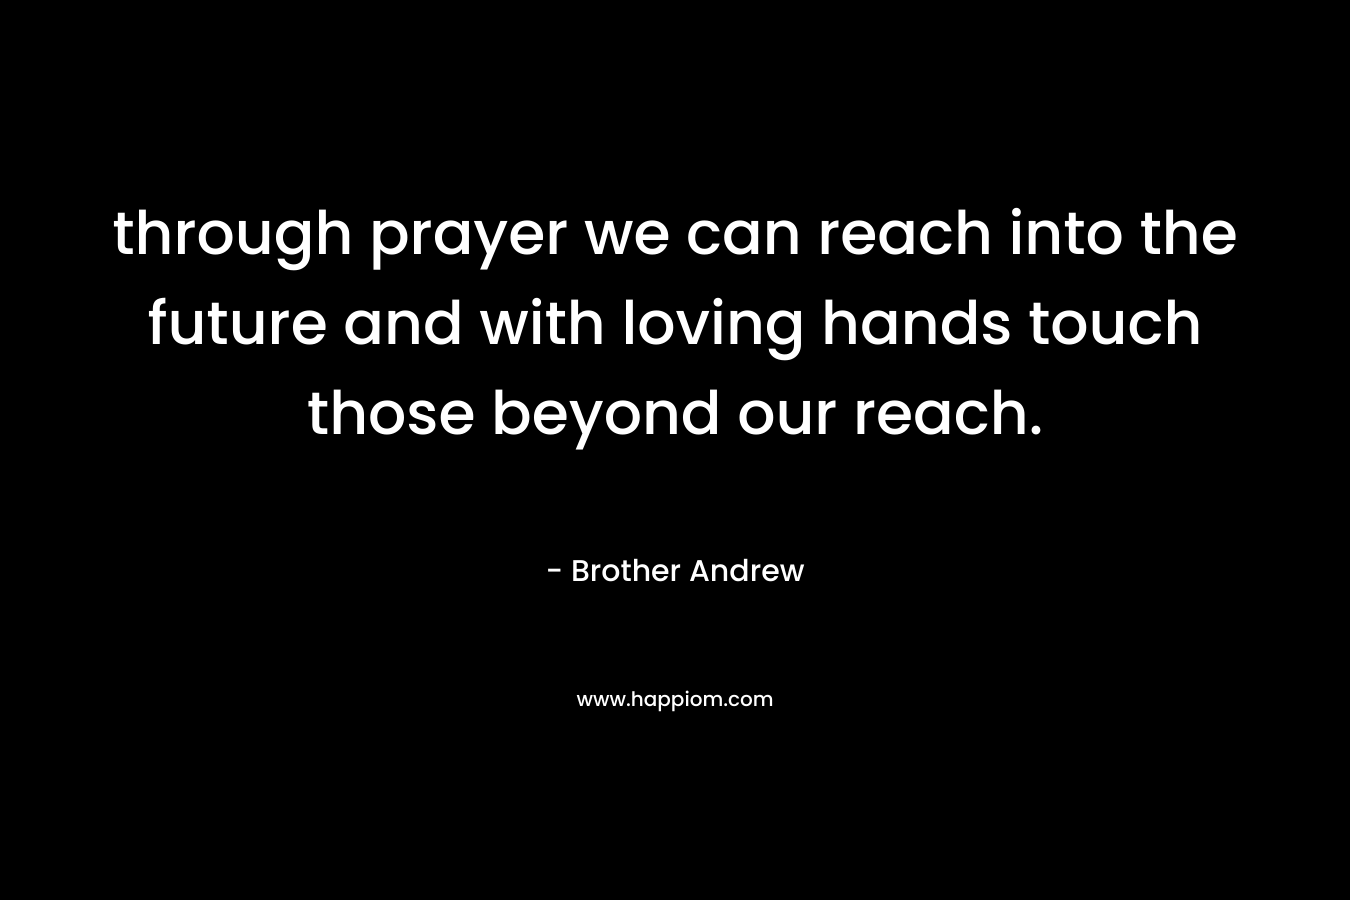 through prayer we can reach into the future and with loving hands touch those beyond our reach. – Brother Andrew